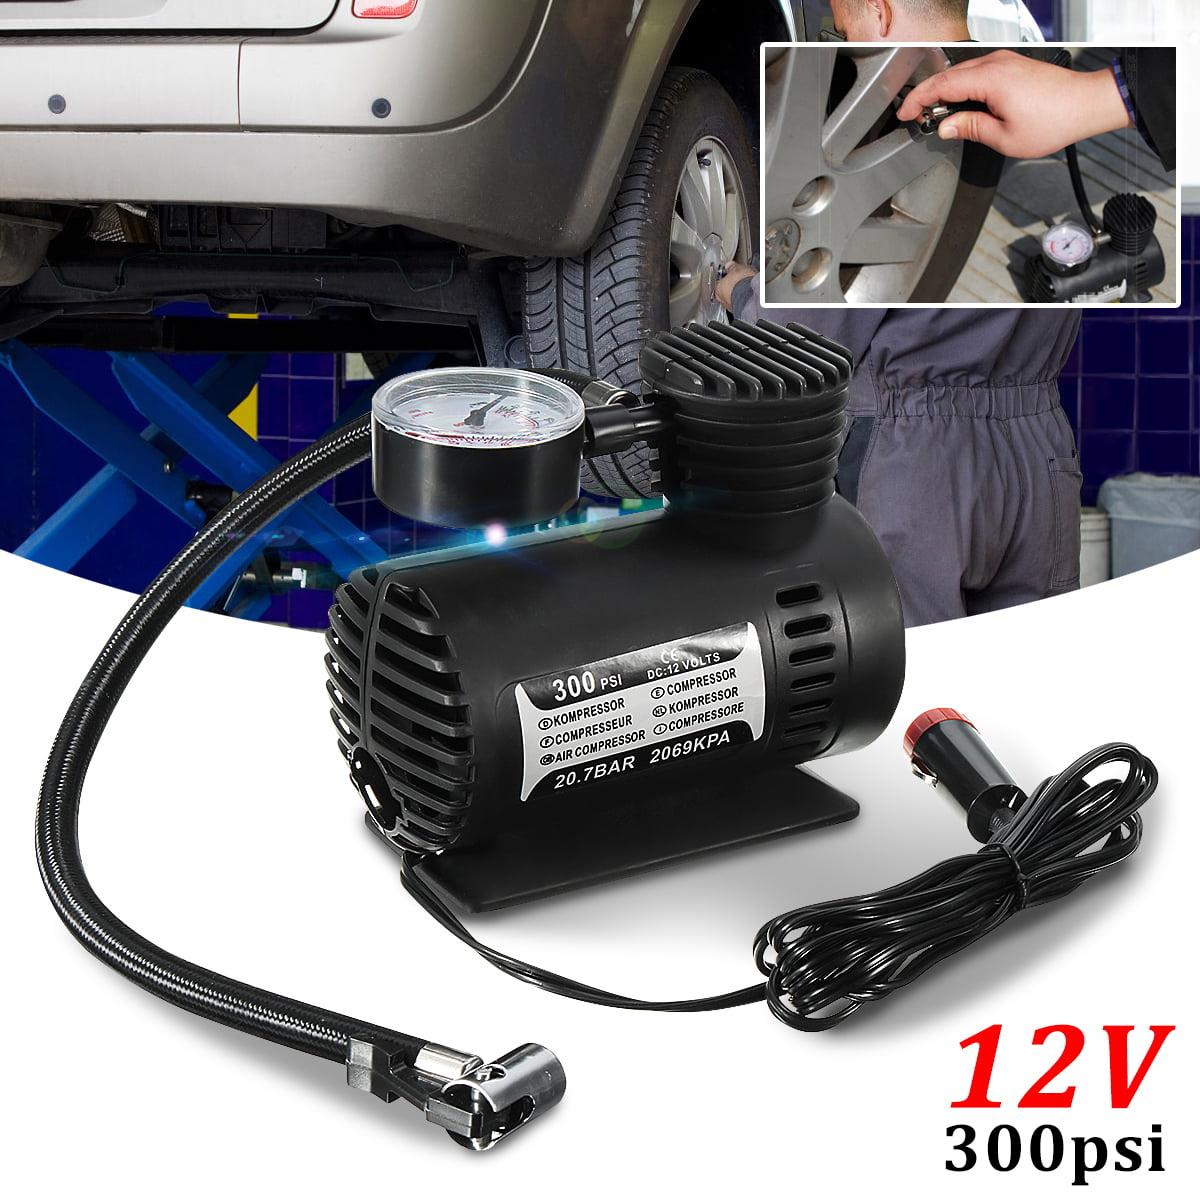 Tyre inflator can